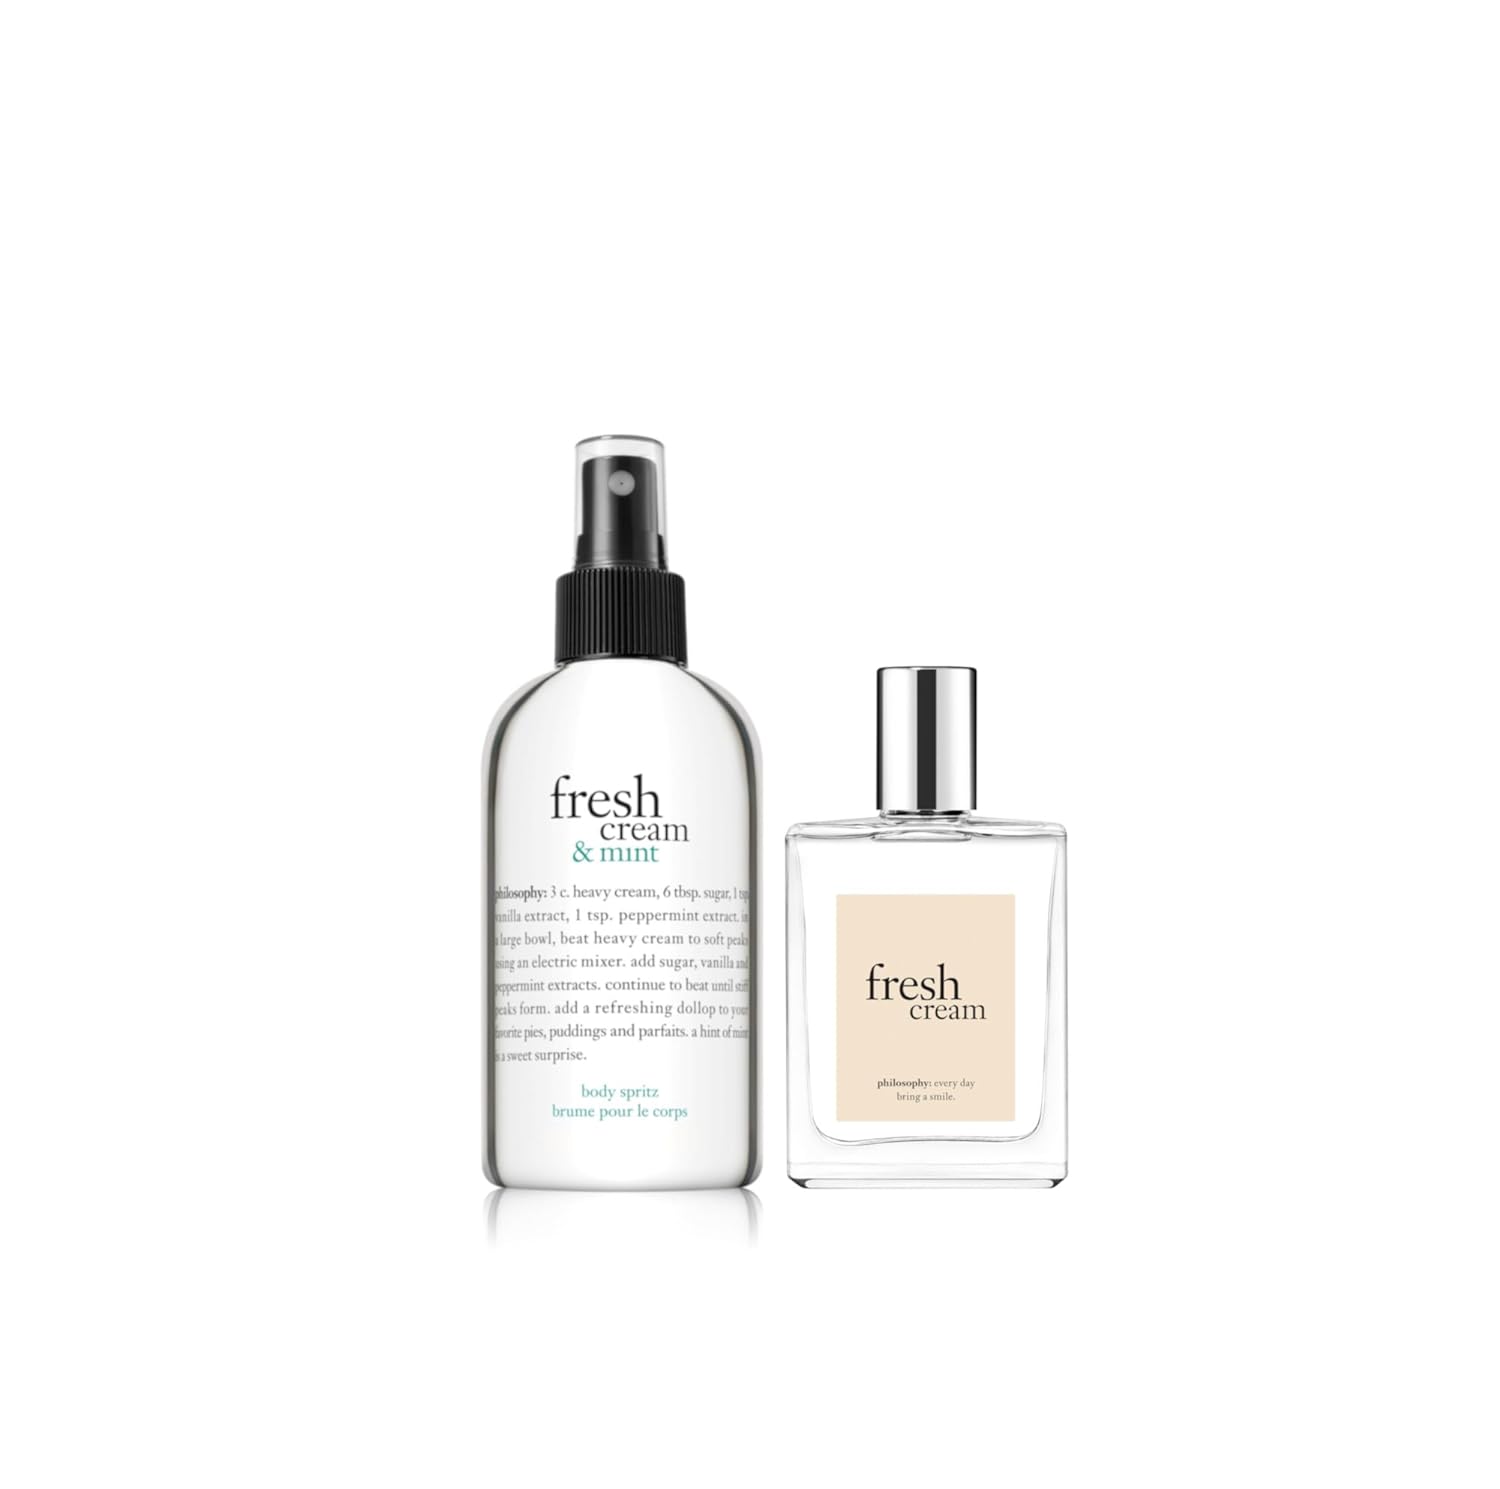 philosophy fresh cream - mint body spray & eau de toilette with notes of fresh vanilla and cream : Beauty & Personal Care